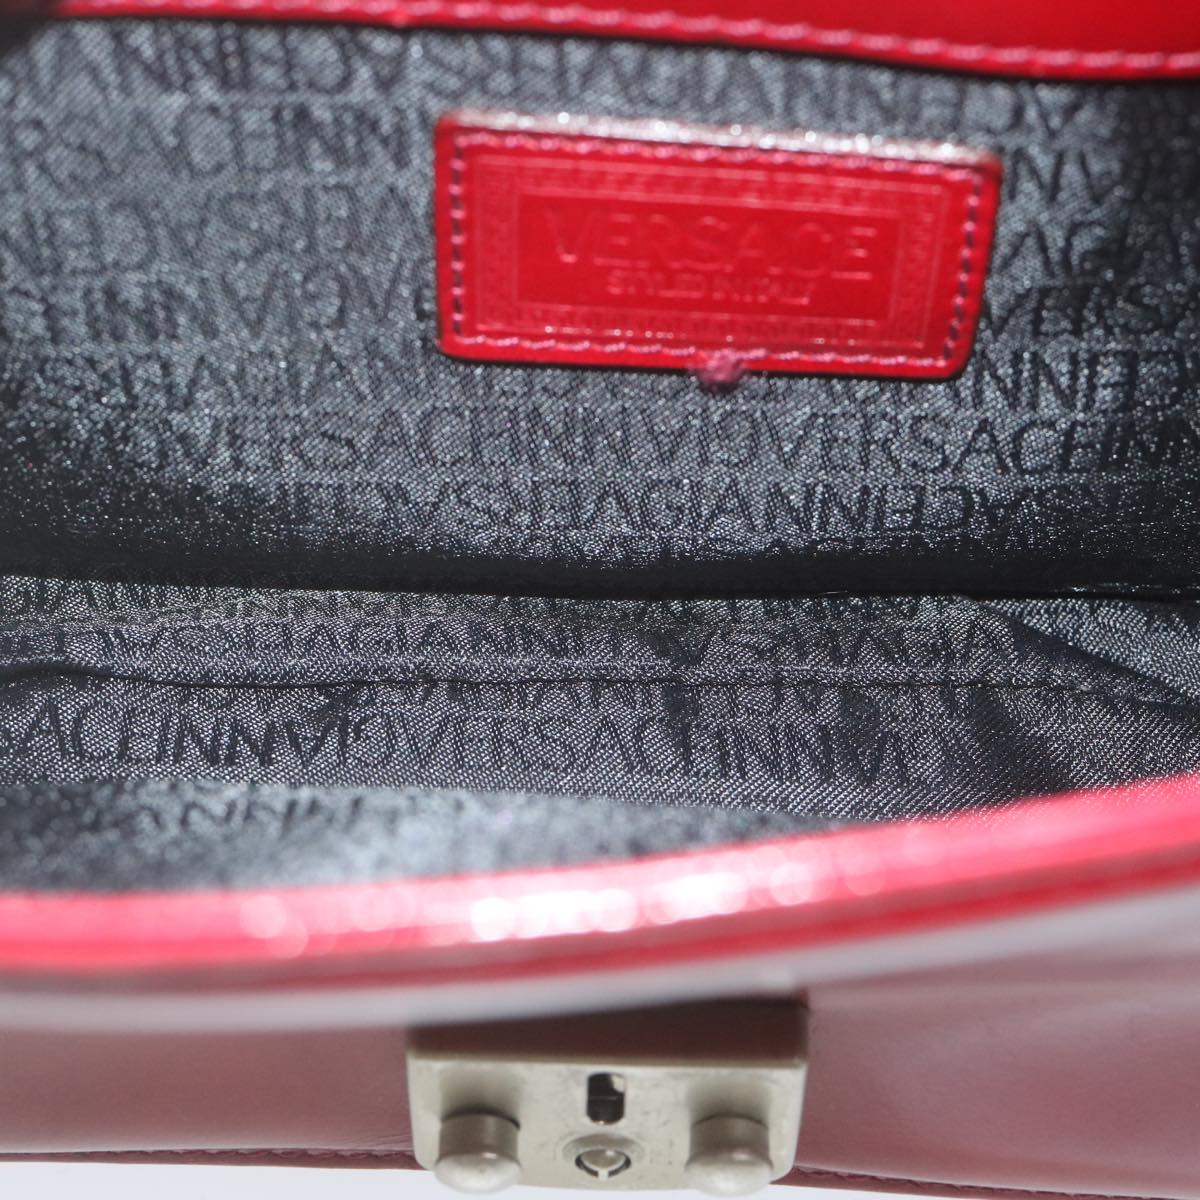 VERSACE Shoulder Bag Leather Red Auth ac2601